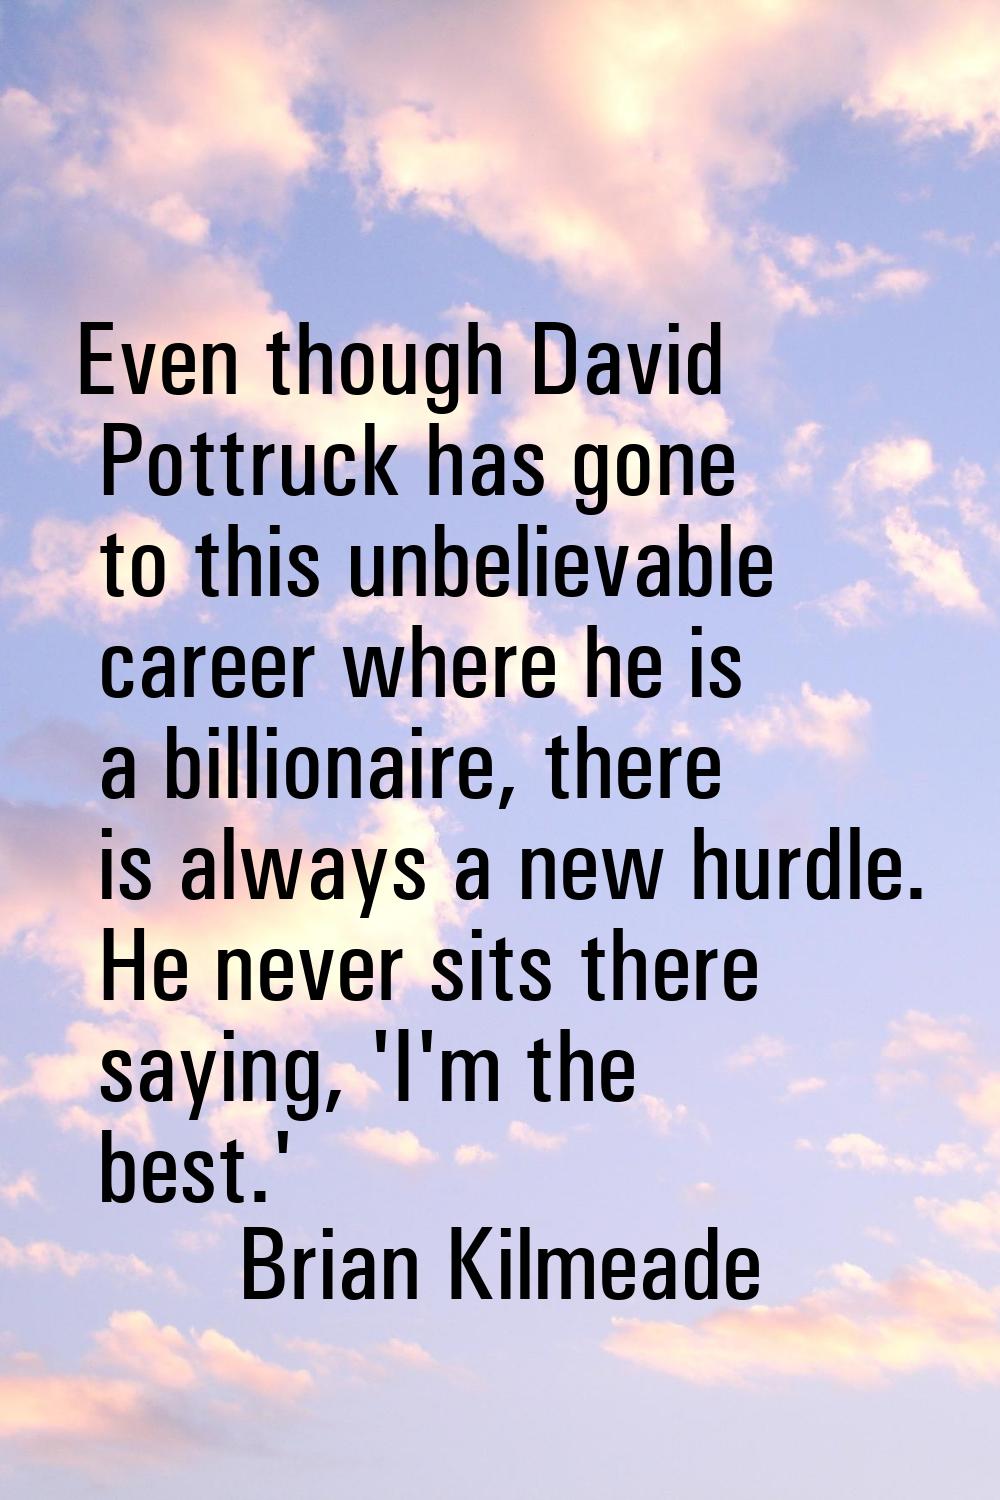 Even though David Pottruck has gone to this unbelievable career where he is a billionaire, there is